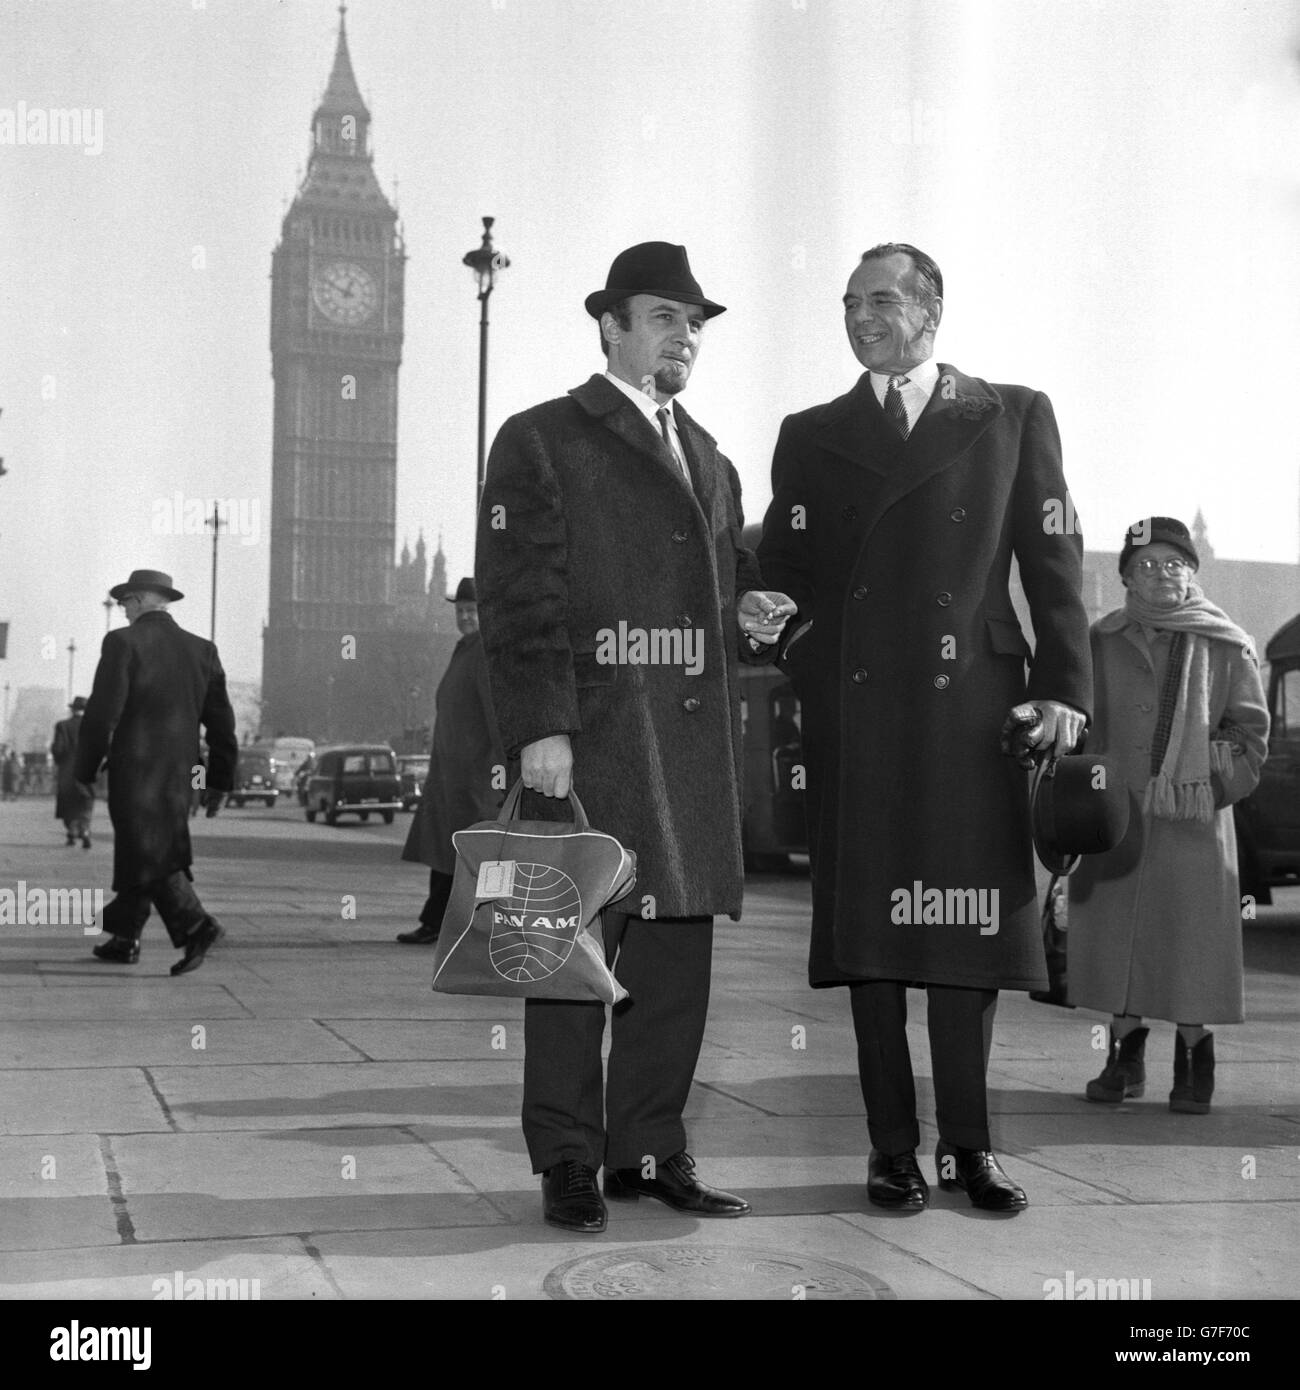 Jazz bandleader Acker Bilk (l) and orchestral conductor Sir Malcolm Sargent meet in the shadow of Big Ben at Westminster, London. they had just visited the Treasury as two members of a musicians' deputation seeking a reduction in the 25 per cent purchase tax on musical instruments. The deputation - led by Dr W. Greenhouse Allt, Principal of Trinity College of Music and President of the National Music Council of Great Britain - were received by Edward Du Cann, Economic Secretary to the Treasury. Stock Photo